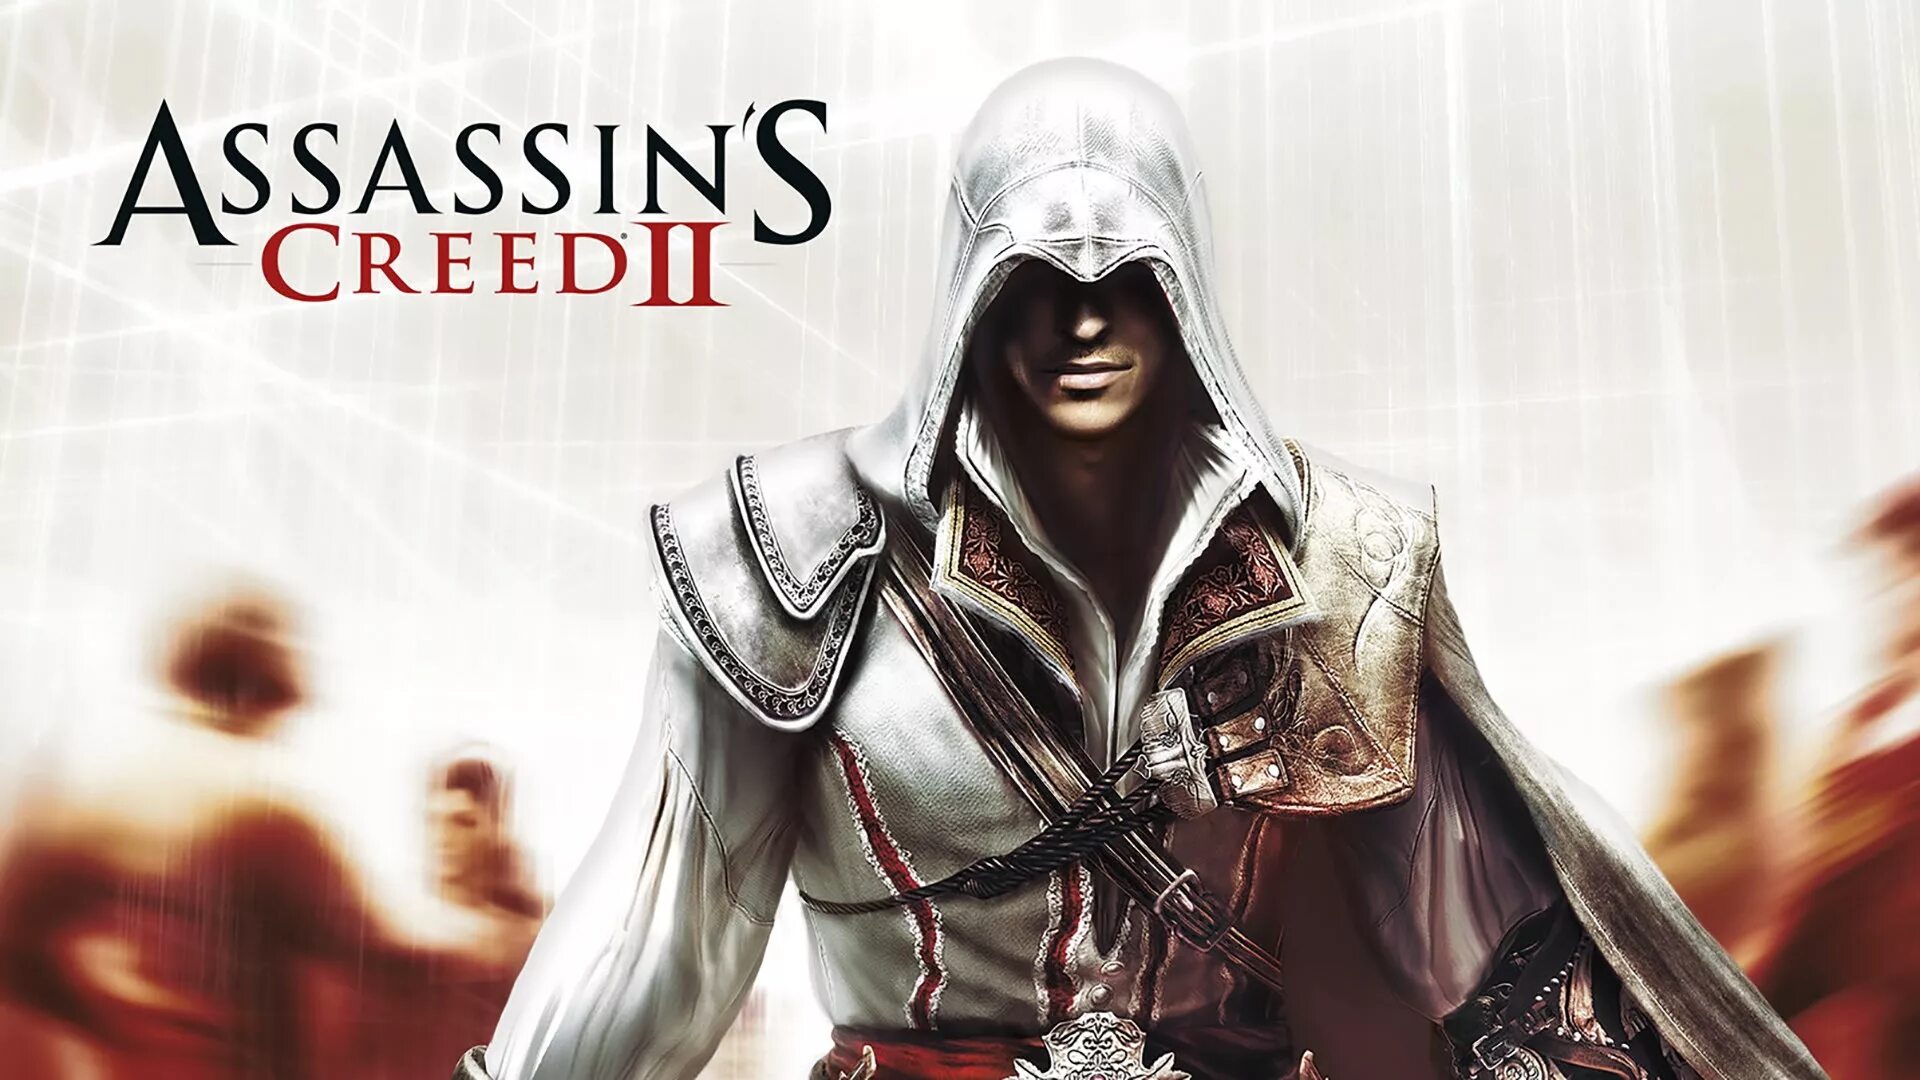 Assassin's creed soundtrack. Assassin’s Creed the Ezio collection. Эцио ассасин 2 Постер. Ассасин Крид 2 Делюкс эдишн. Ассасин Крид 2 Эцио.